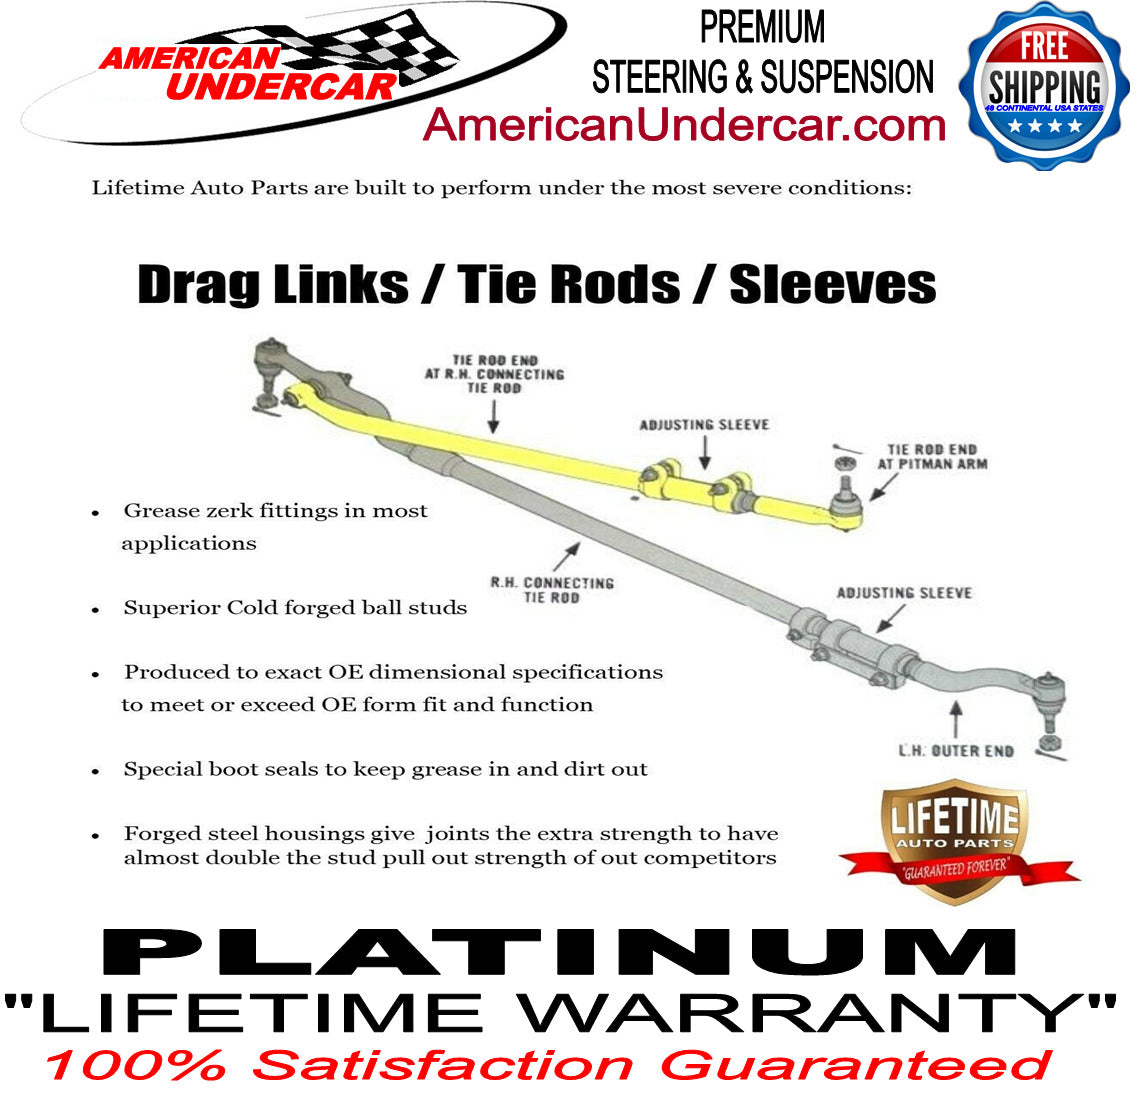 Lifetime Ball Joint Drag Link Tie Rod Sleeve Kit for 1999-2005 Ford F350, F250 Super Duty, Excursion 4x4